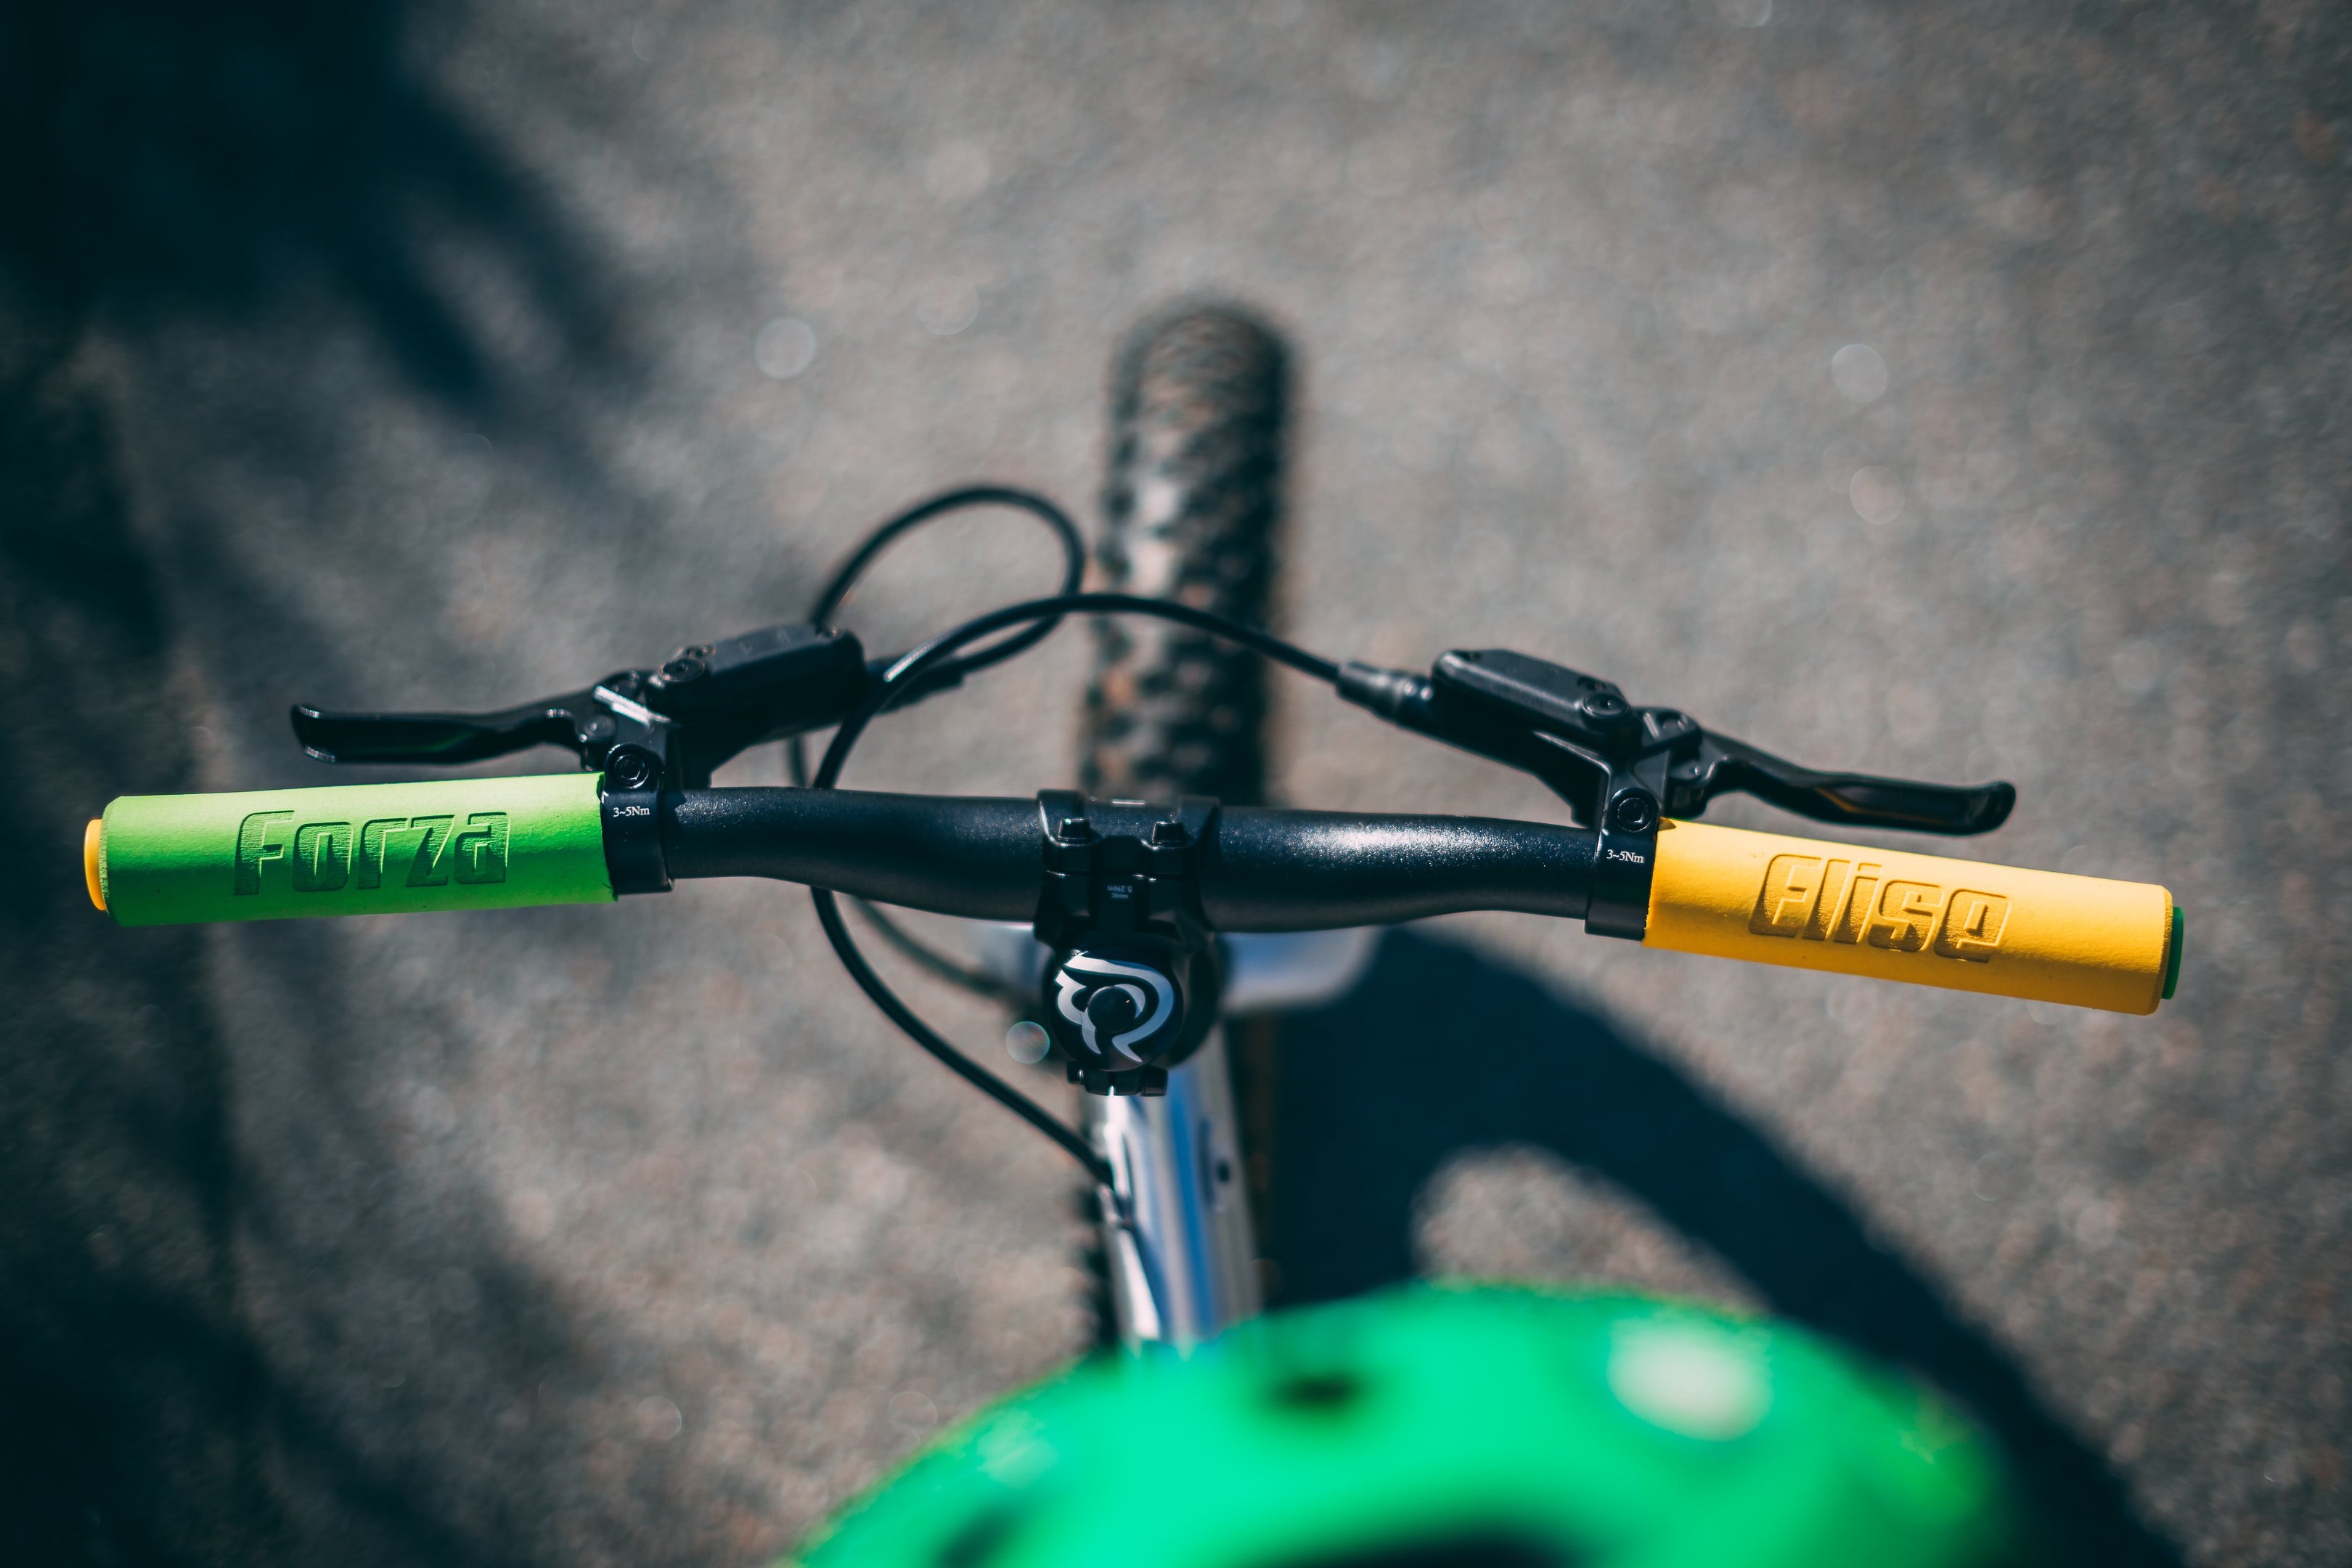 Aerial photo looking down on small bicycle handlebar. Two bright colored ESI grips stand out to an asphalt background. The left grip is green and is engraved with the word "Forza". The right grip is yellow and reads "Elise". 